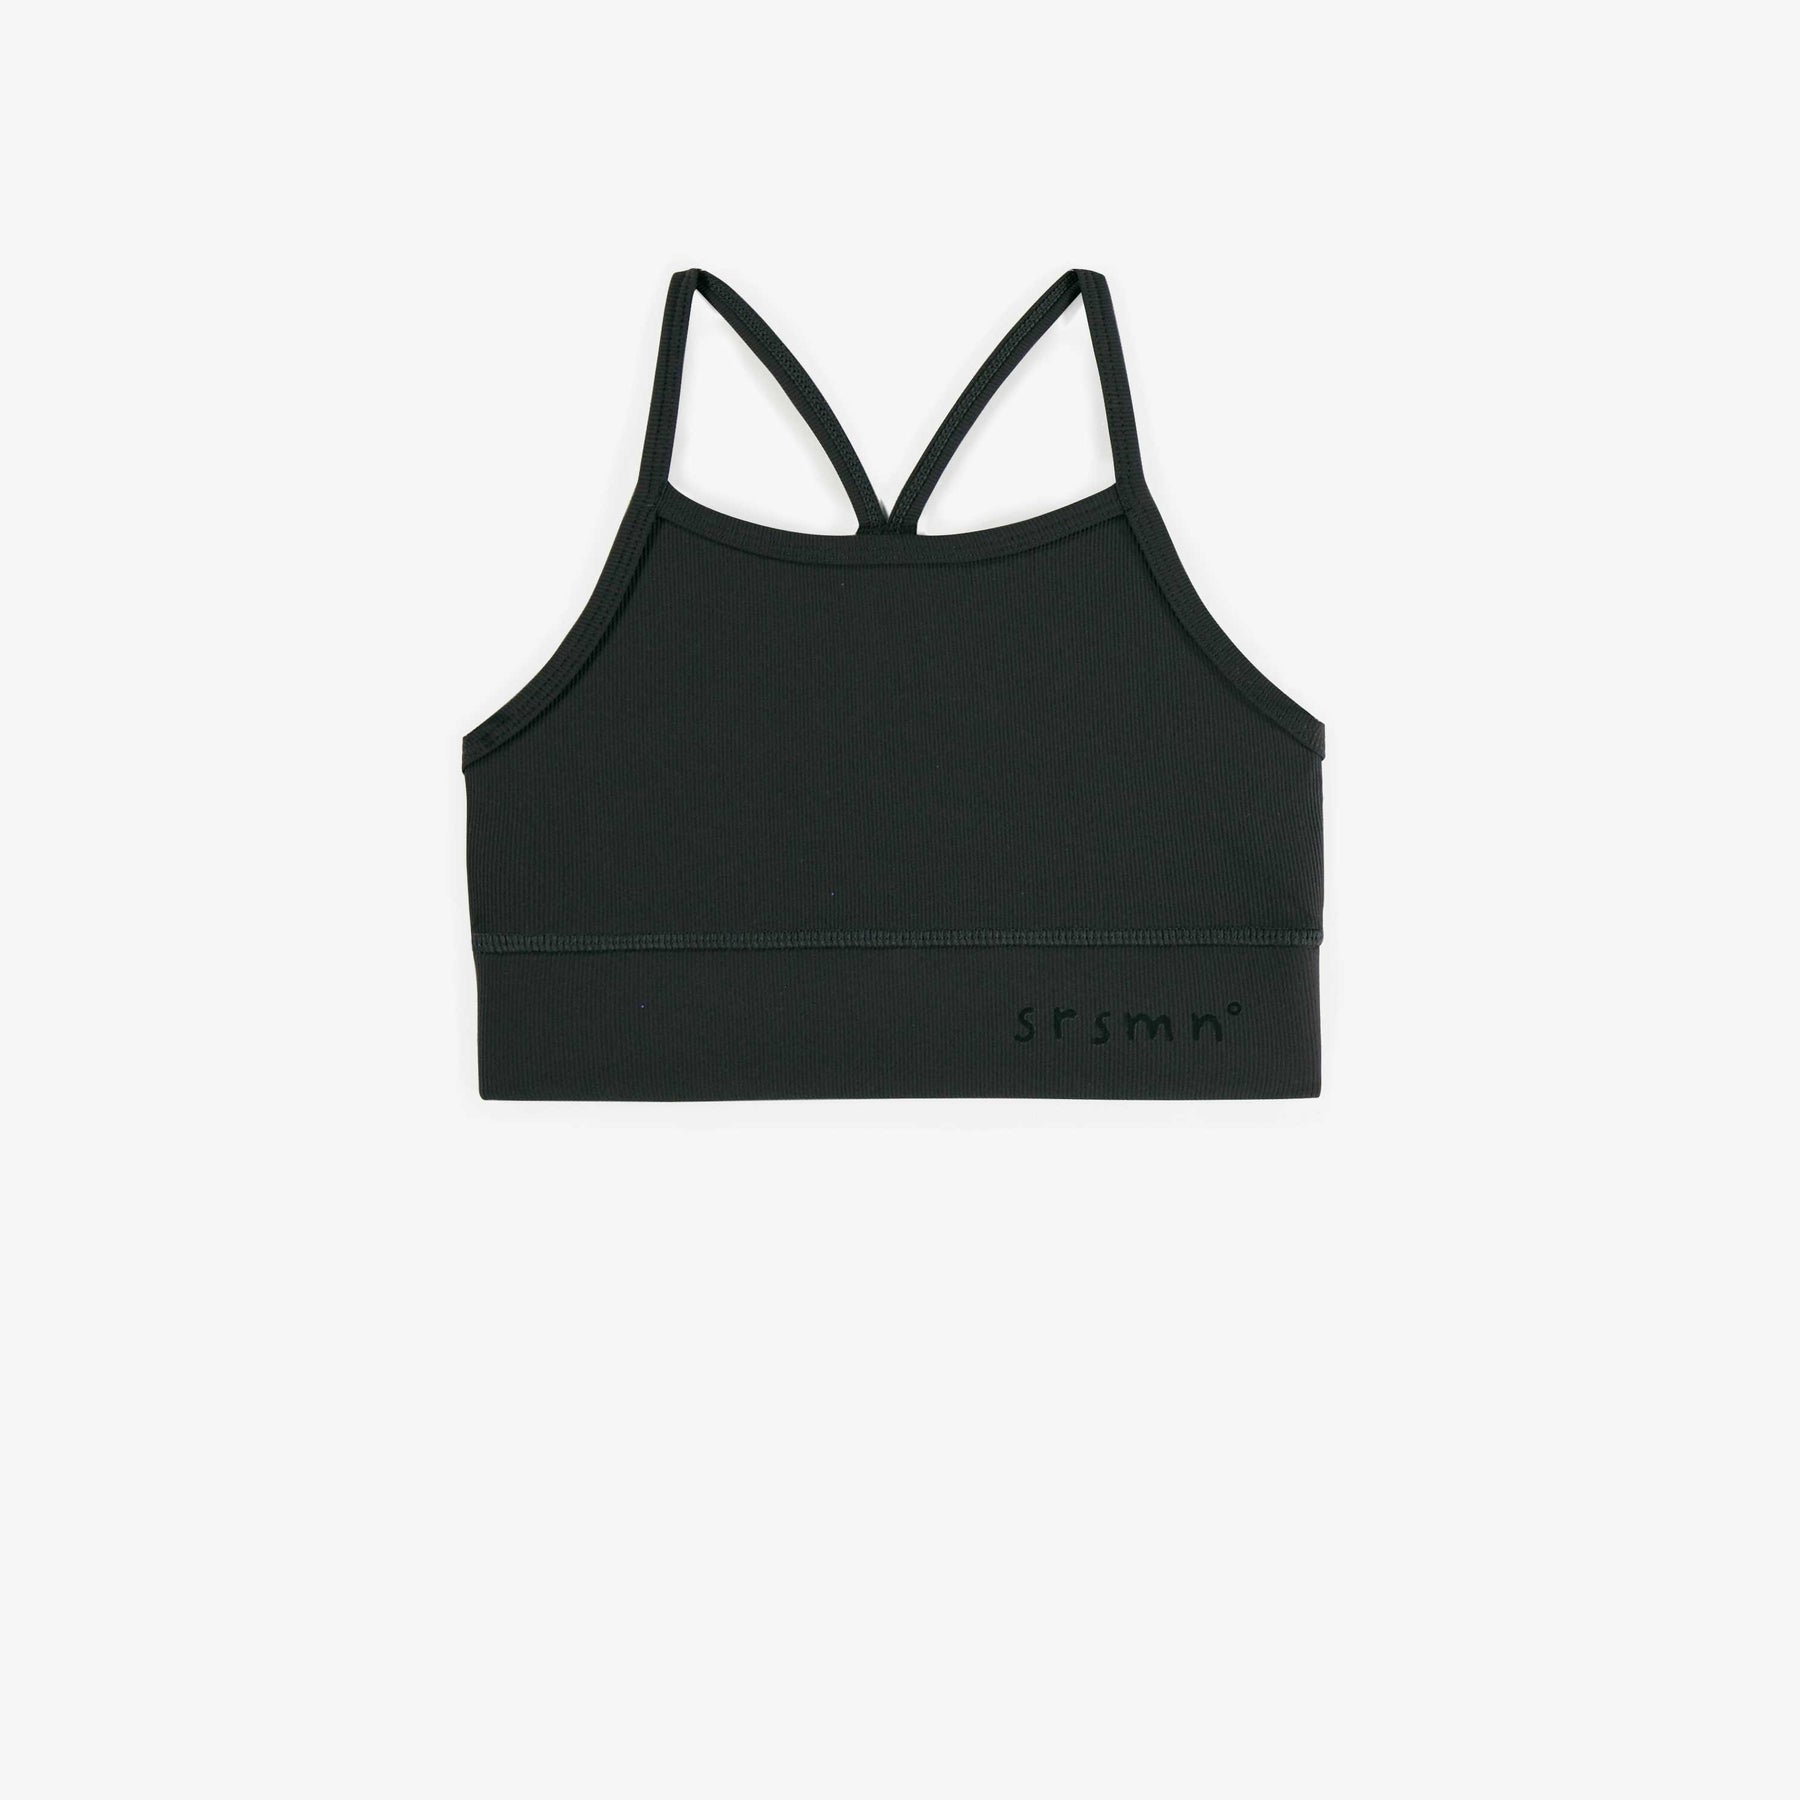 Sports bra with crossed straps in white for girls and women